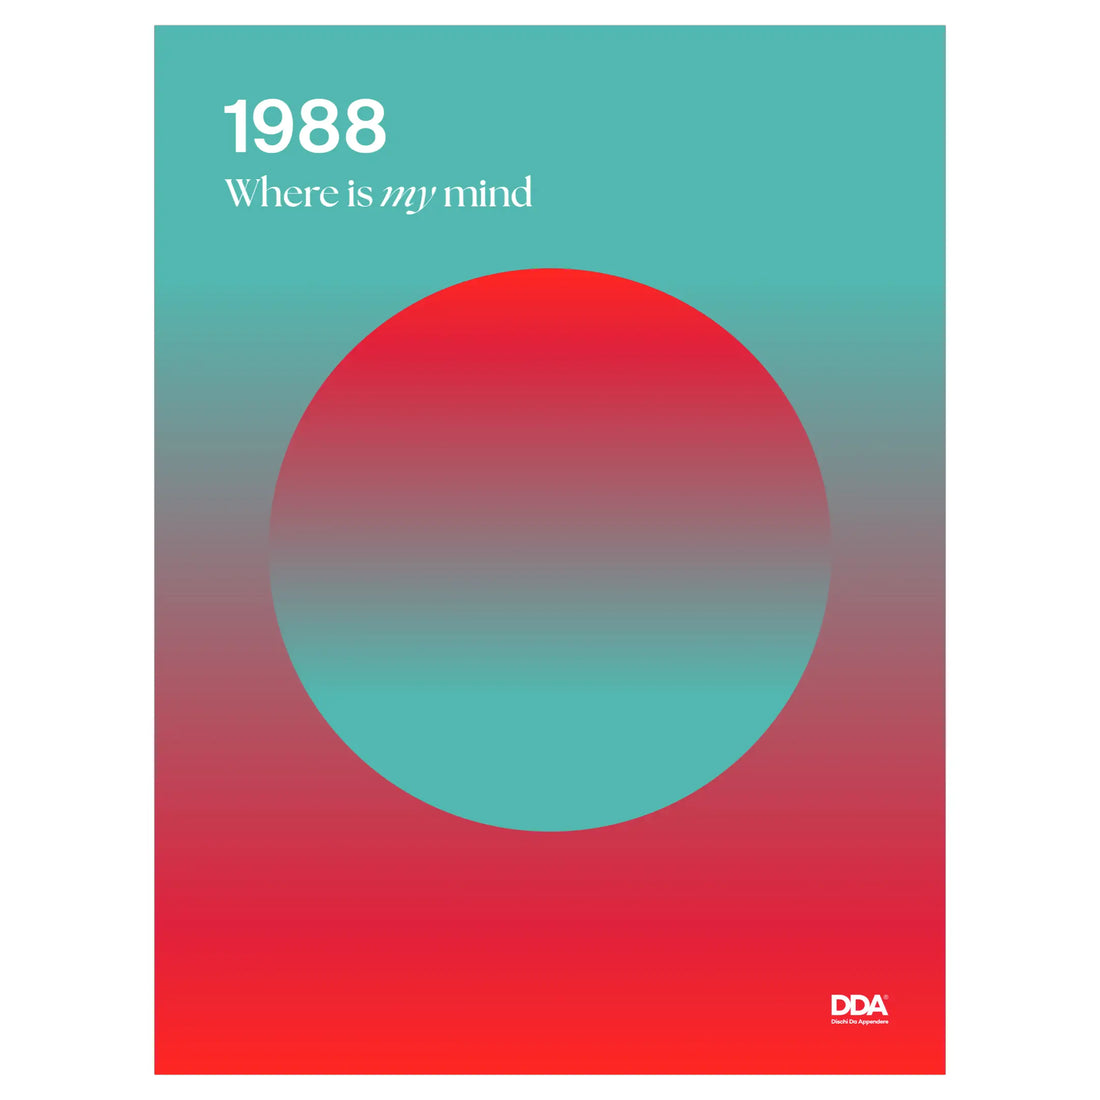 1988 - Where is my mind